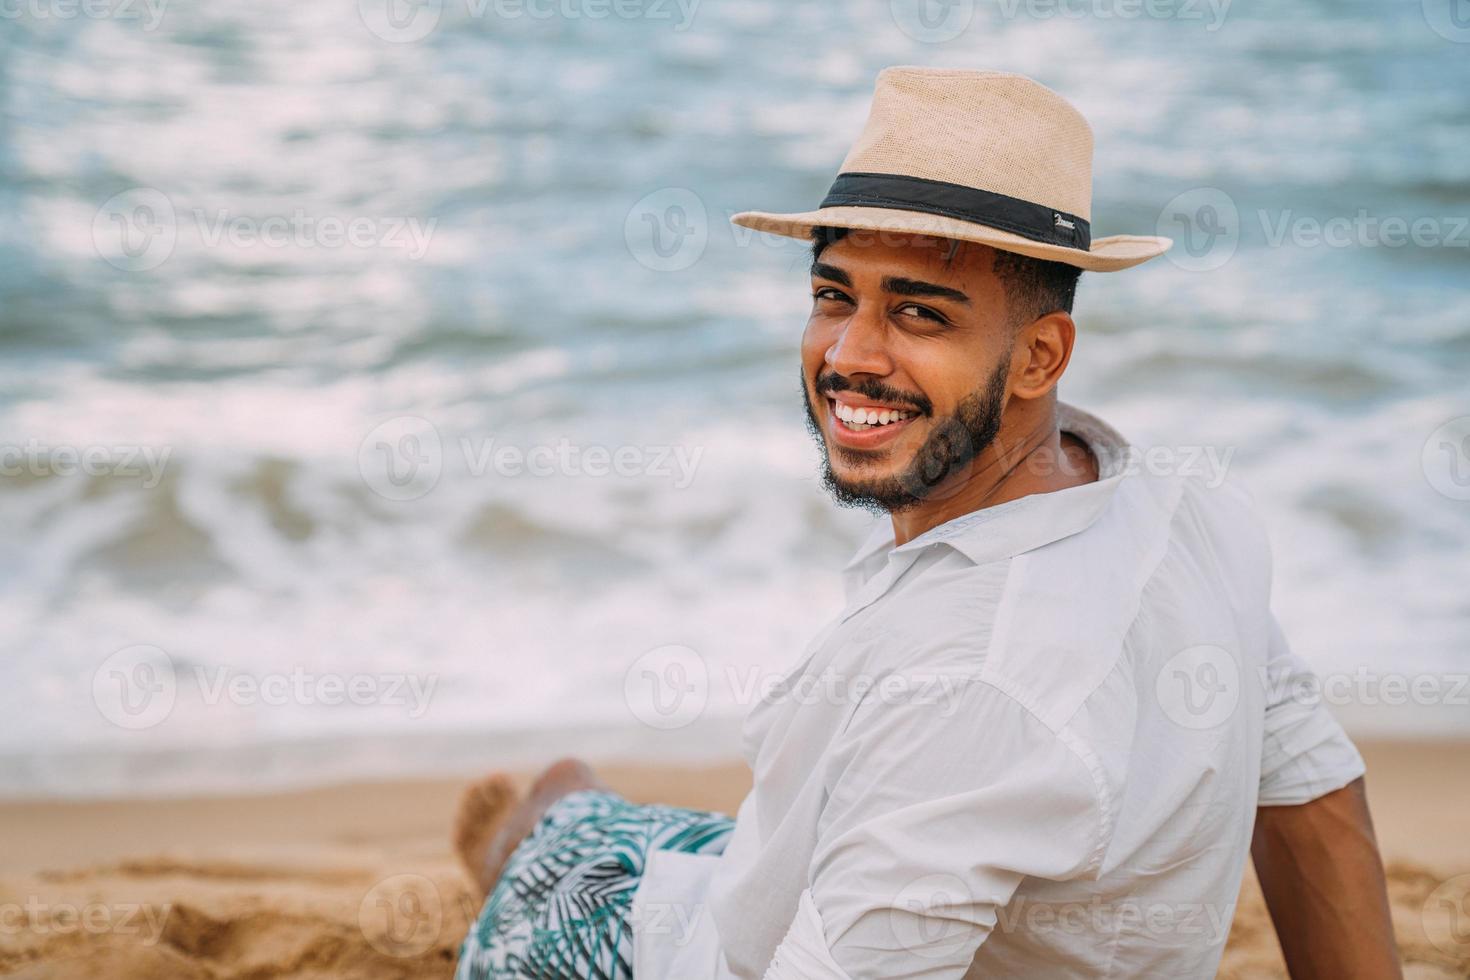 https://static.vecteezy.com/system/resources/previews/009/348/599/non_2x/silhouette-of-a-young-man-on-the-beach-latin-american-man-sitting-on-the-beach-sand-wearing-a-hat-looking-at-the-camera-a-beautiful-summer-day-photo.jpg